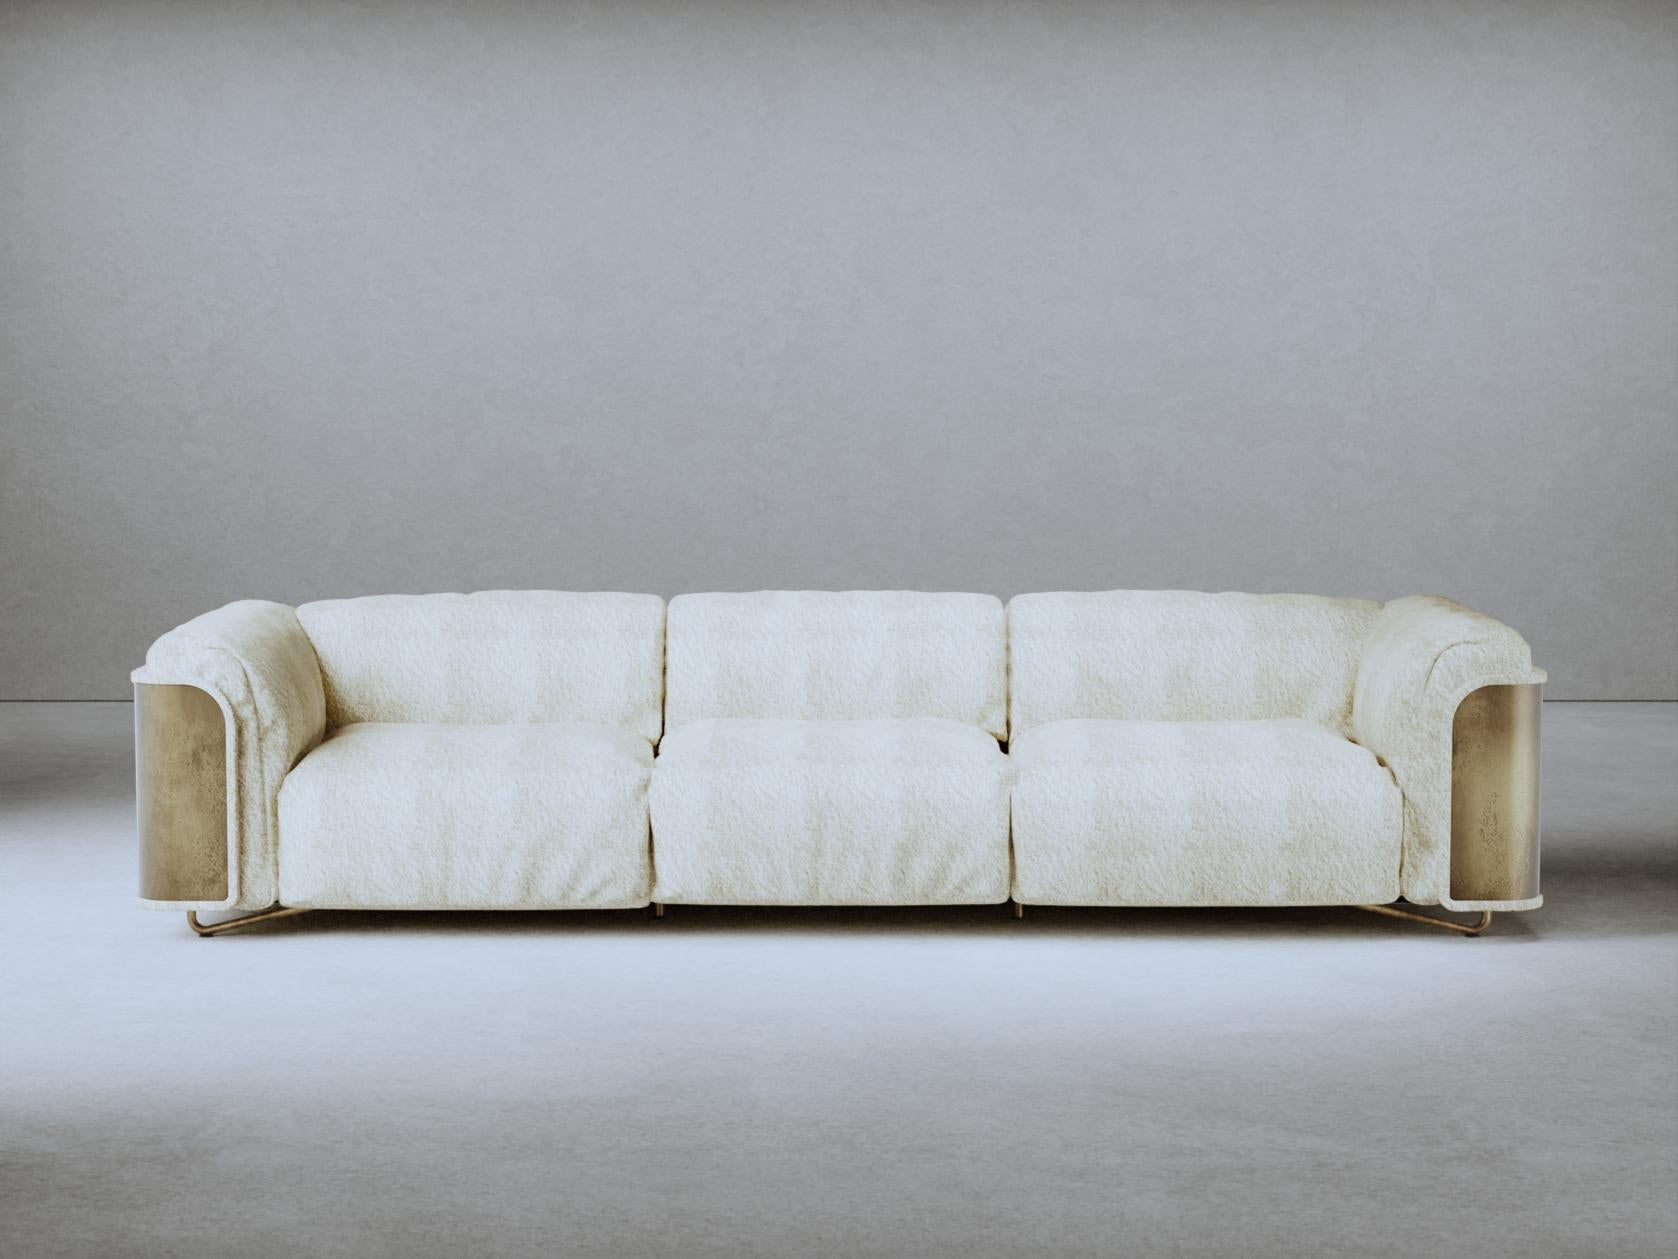 Other Stone Leather Saint Germain Sofa by Gio Pagani For Sale